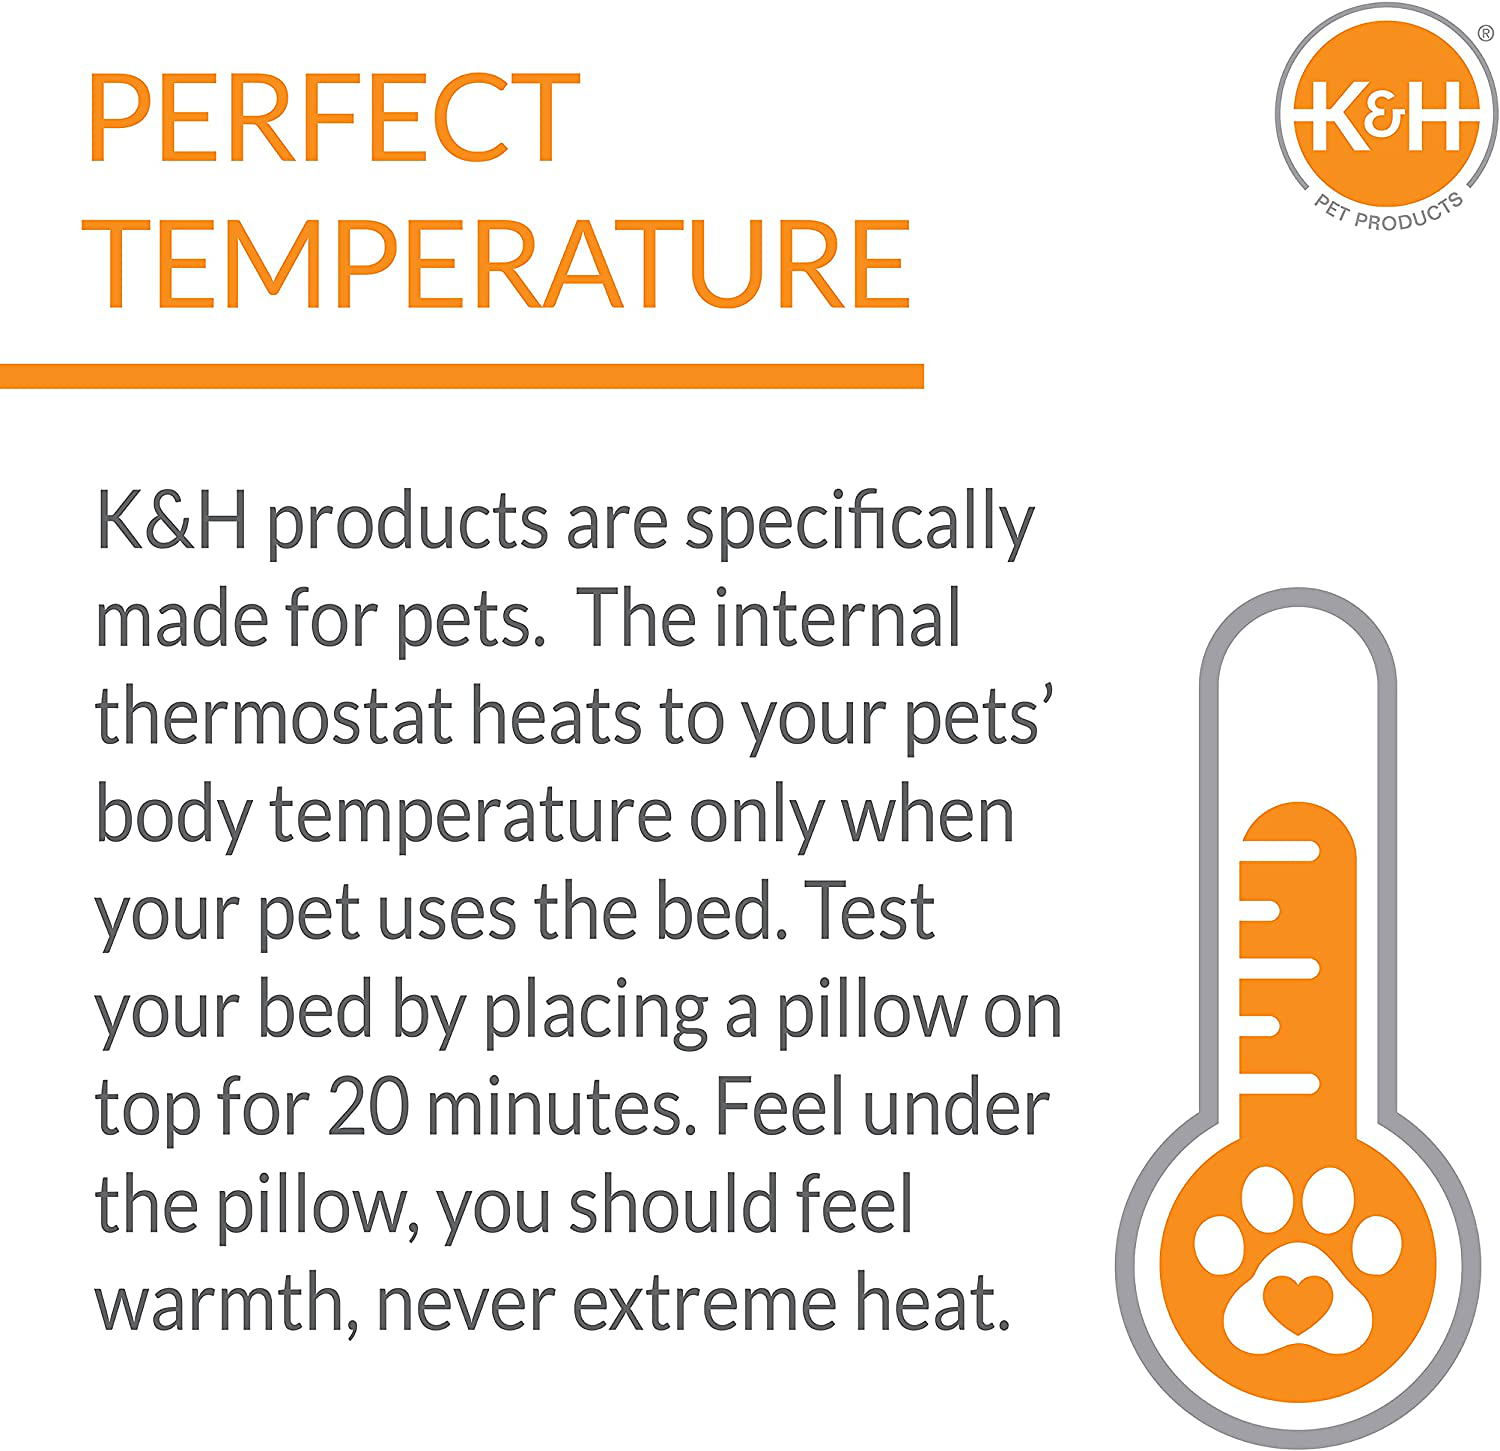 K&H Pet Products Thermo-Plush Pad Indoor Heated Pet Bed for Dogs & Cats